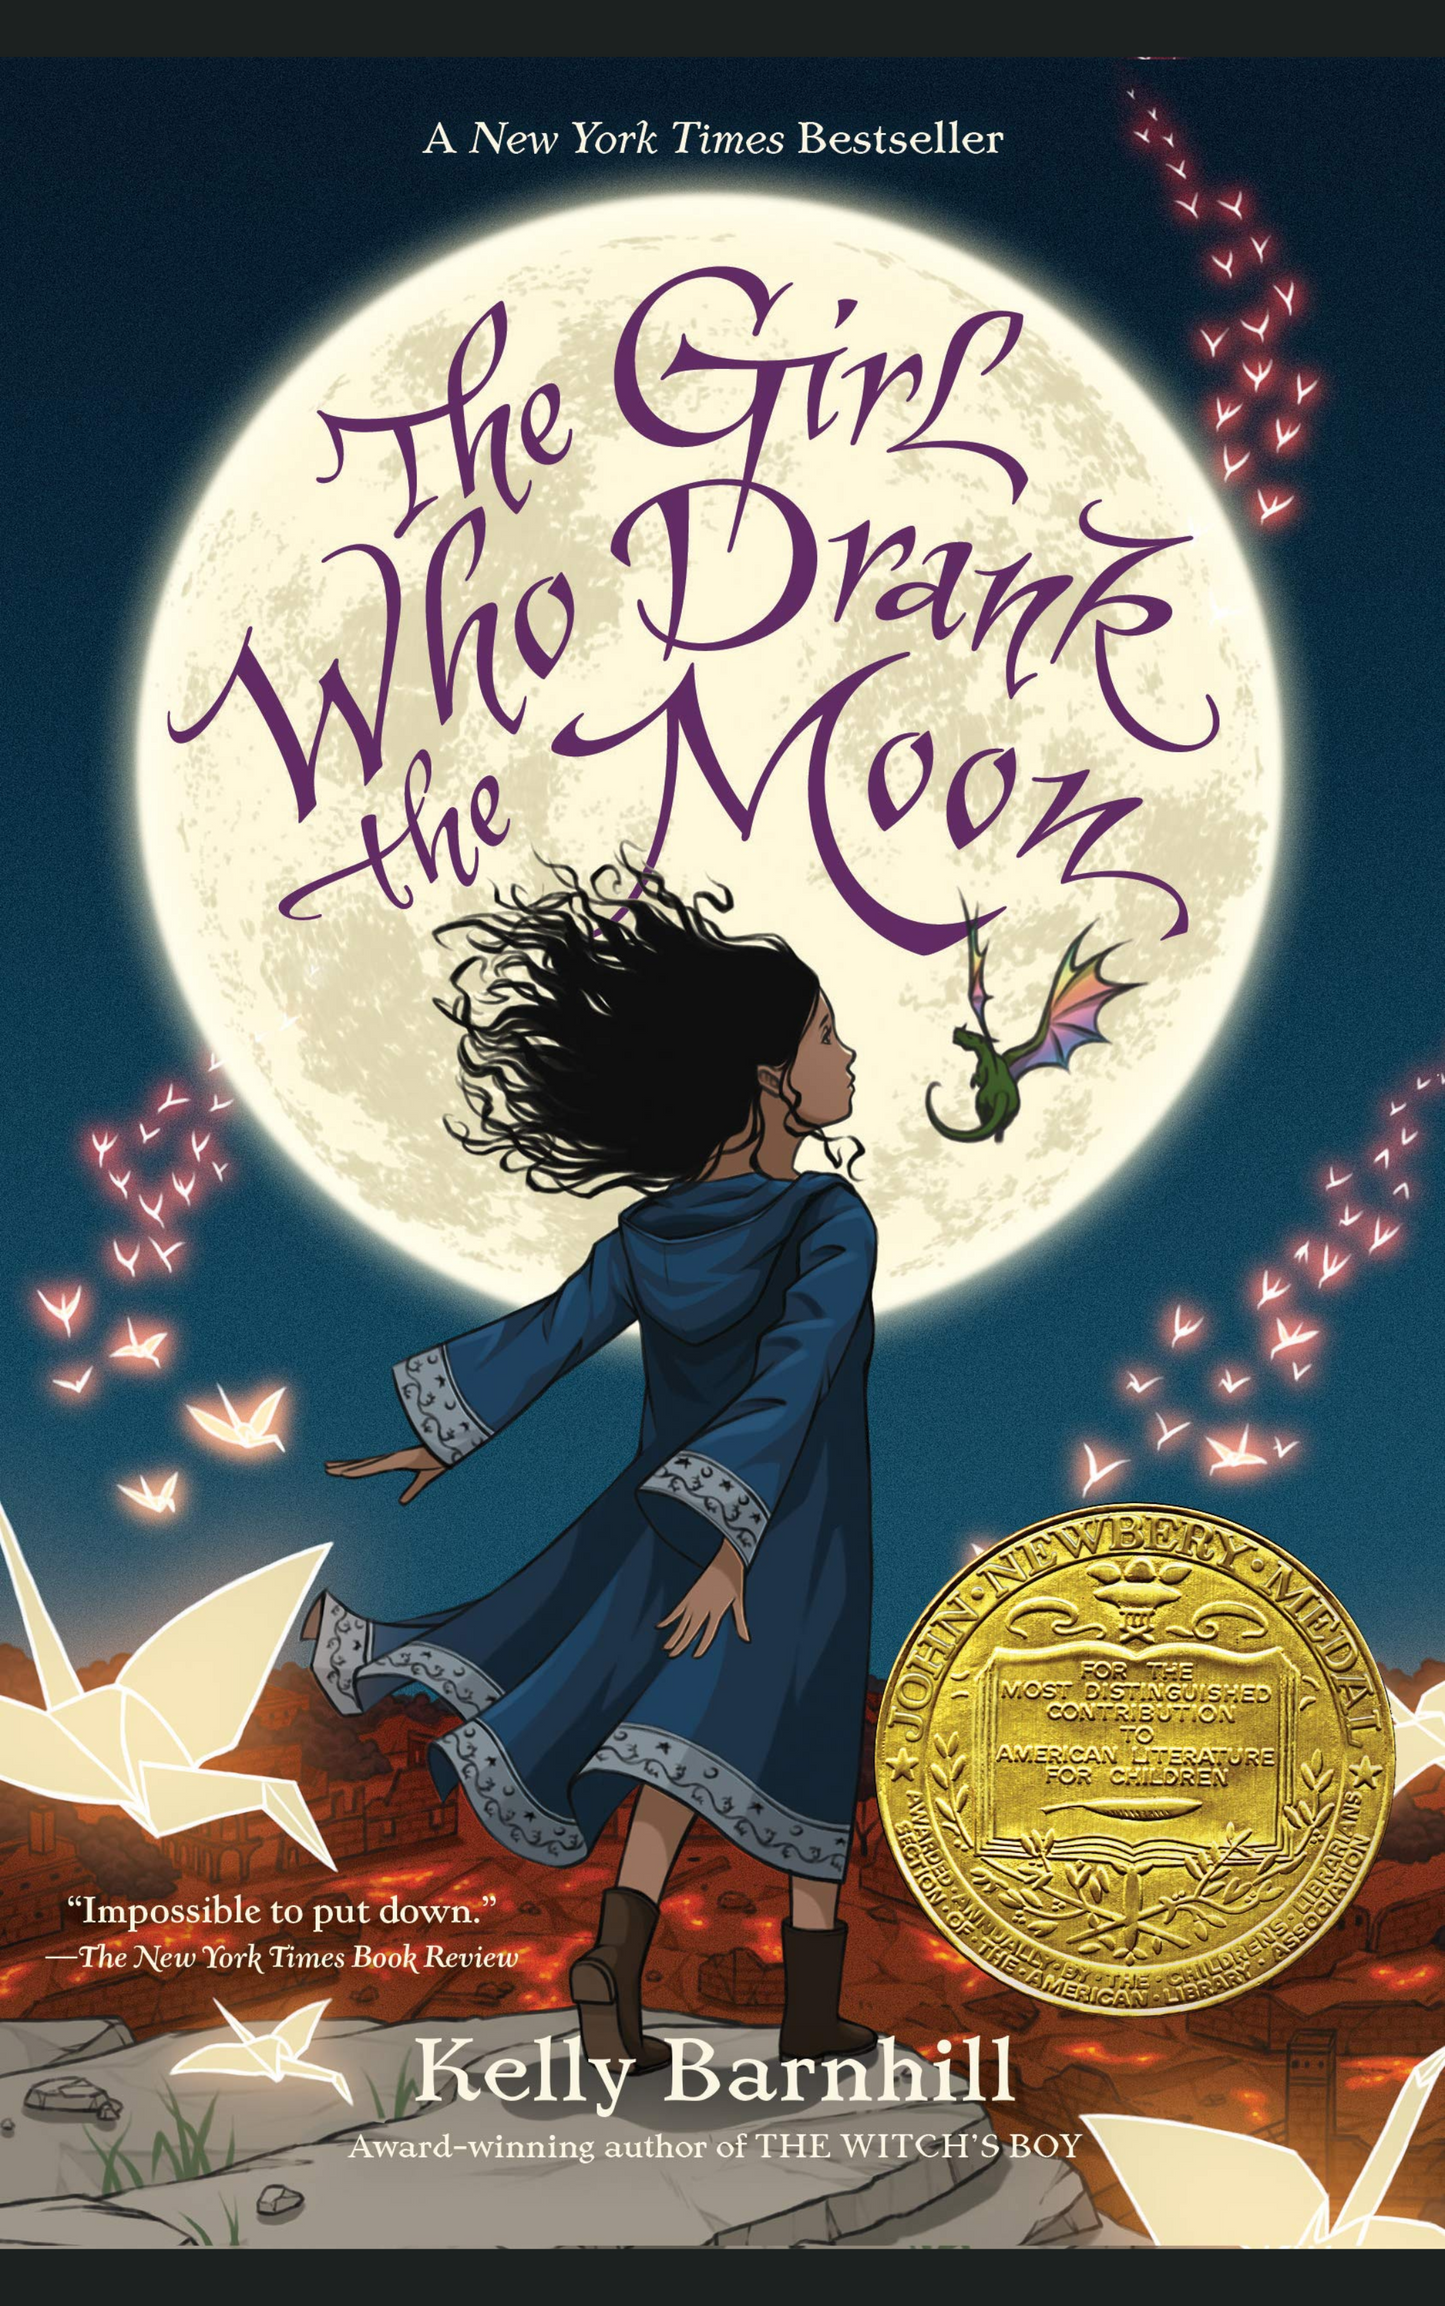 THE GIRL WHO DRANK THE MOON by KELLY BARNHILL